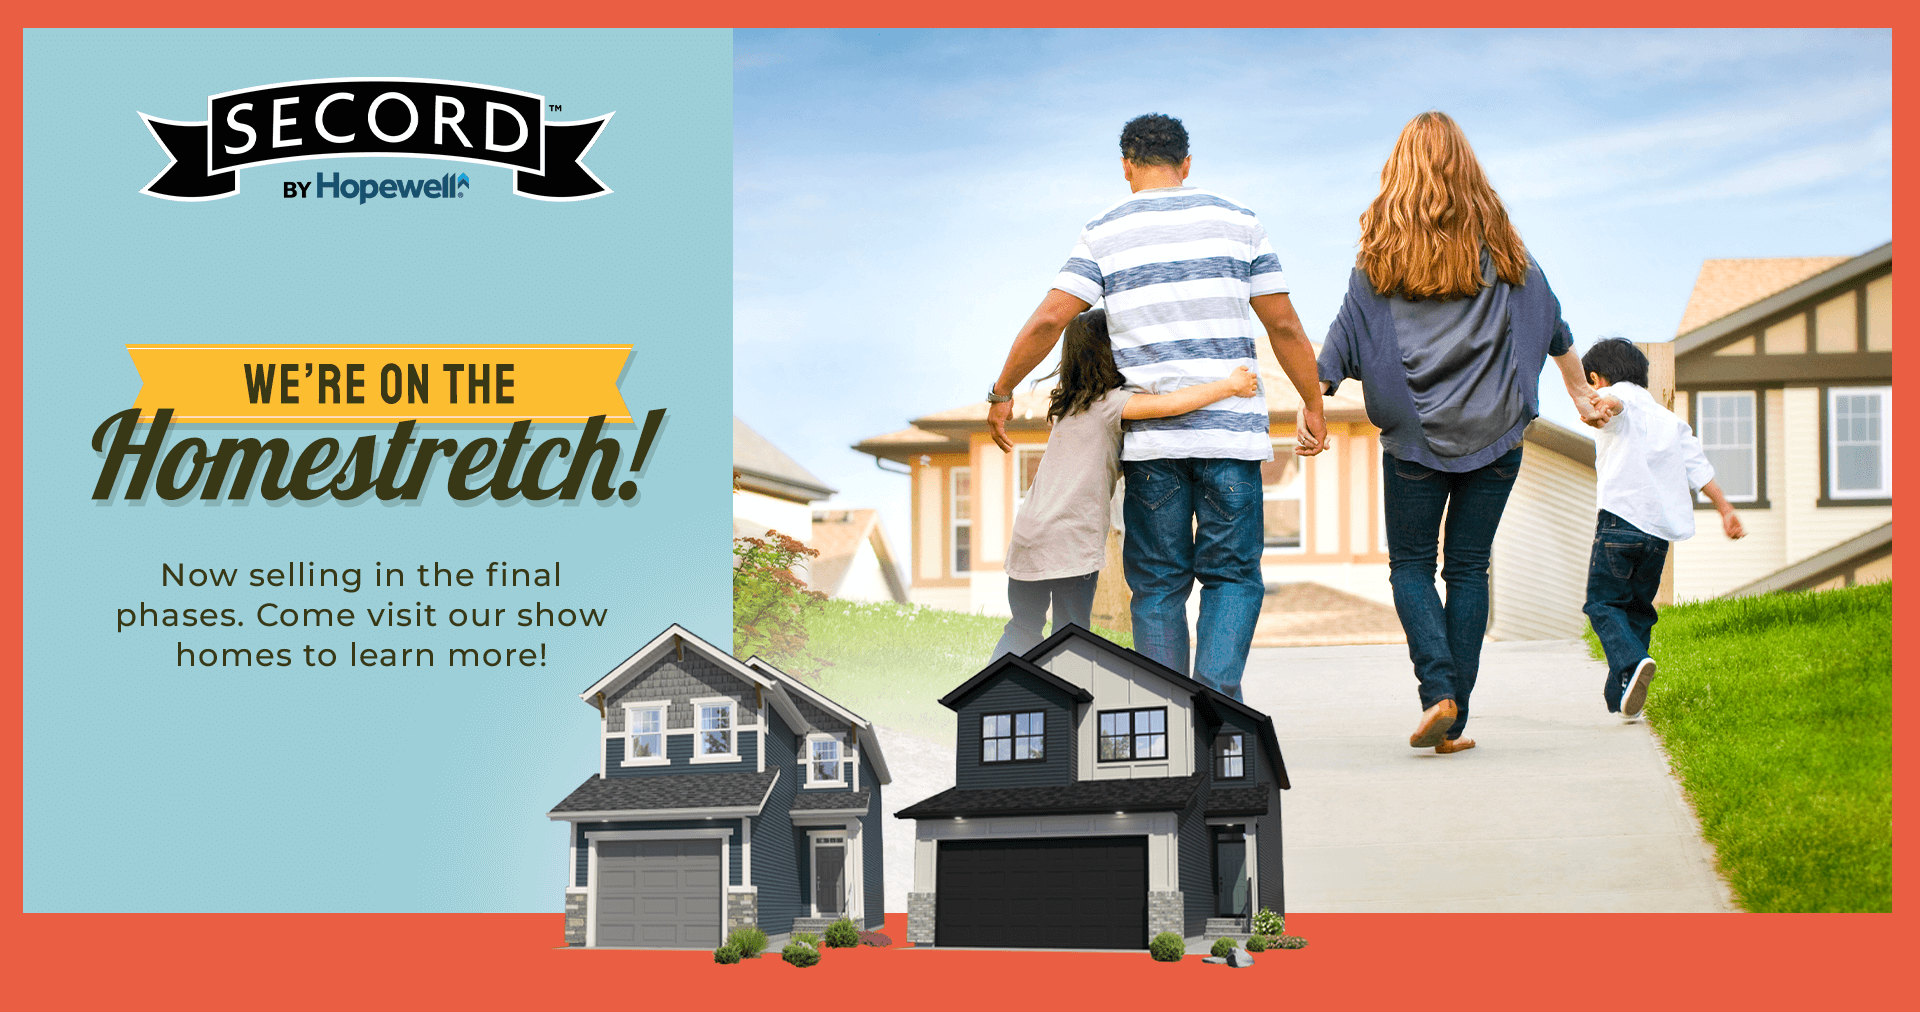 Text: Now selling in the final phases. Come visit our show homes to learn more. Image: Family walking together on sidewalk